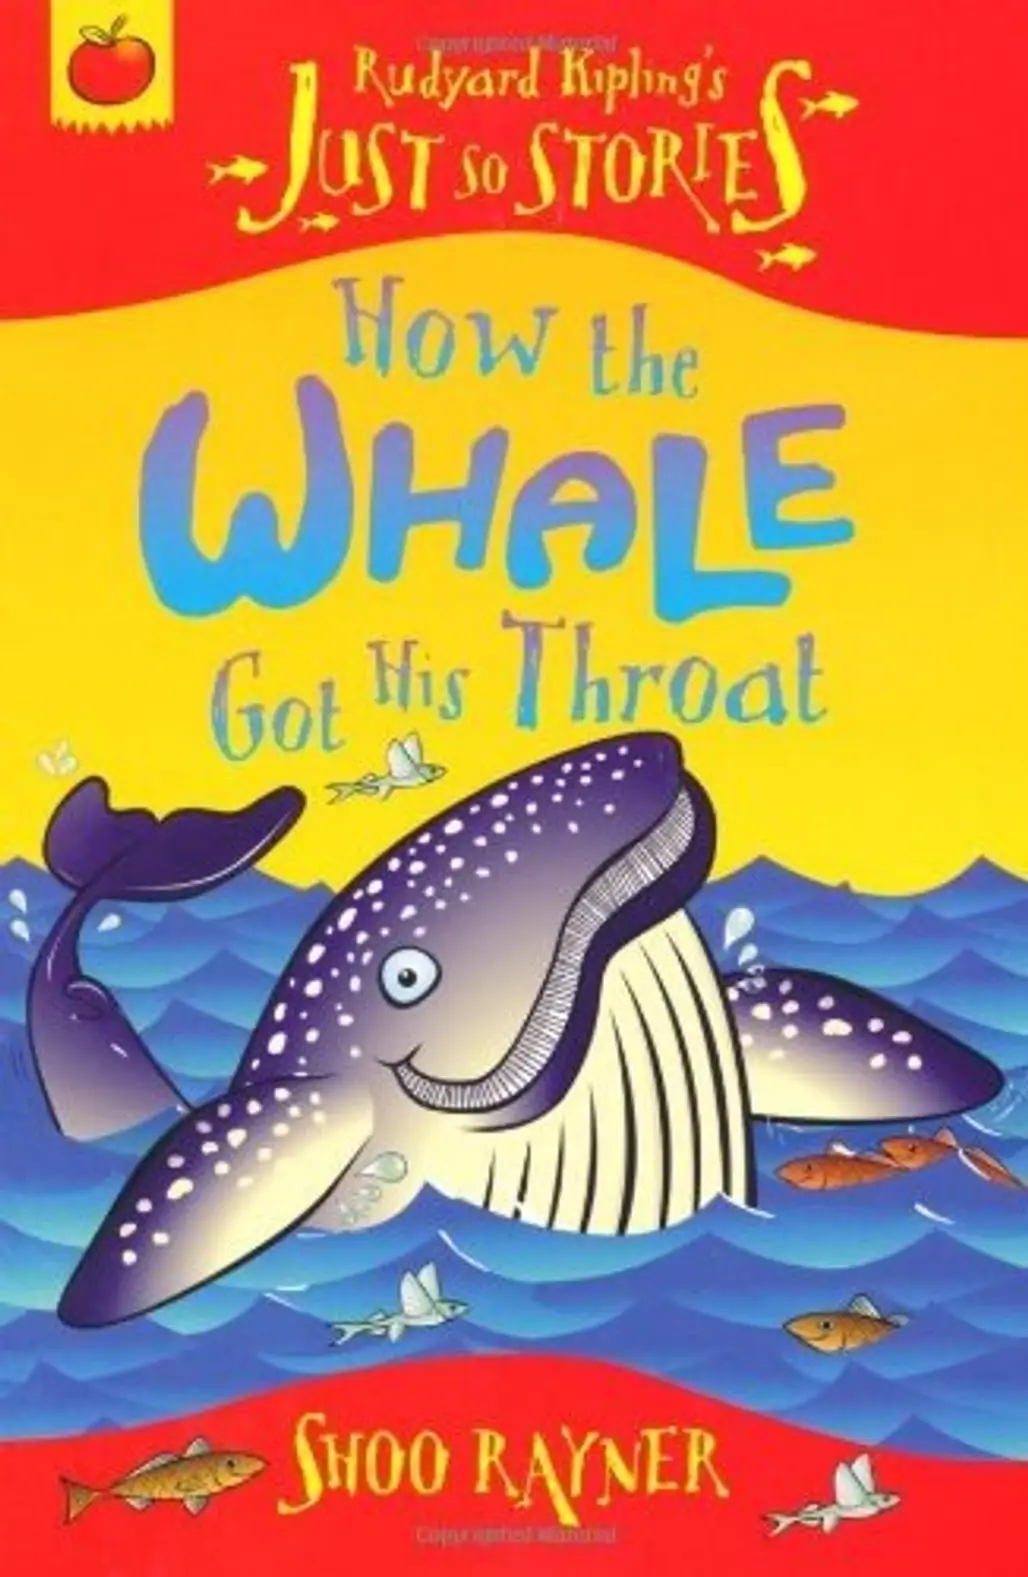 How the Whale Got His Throat